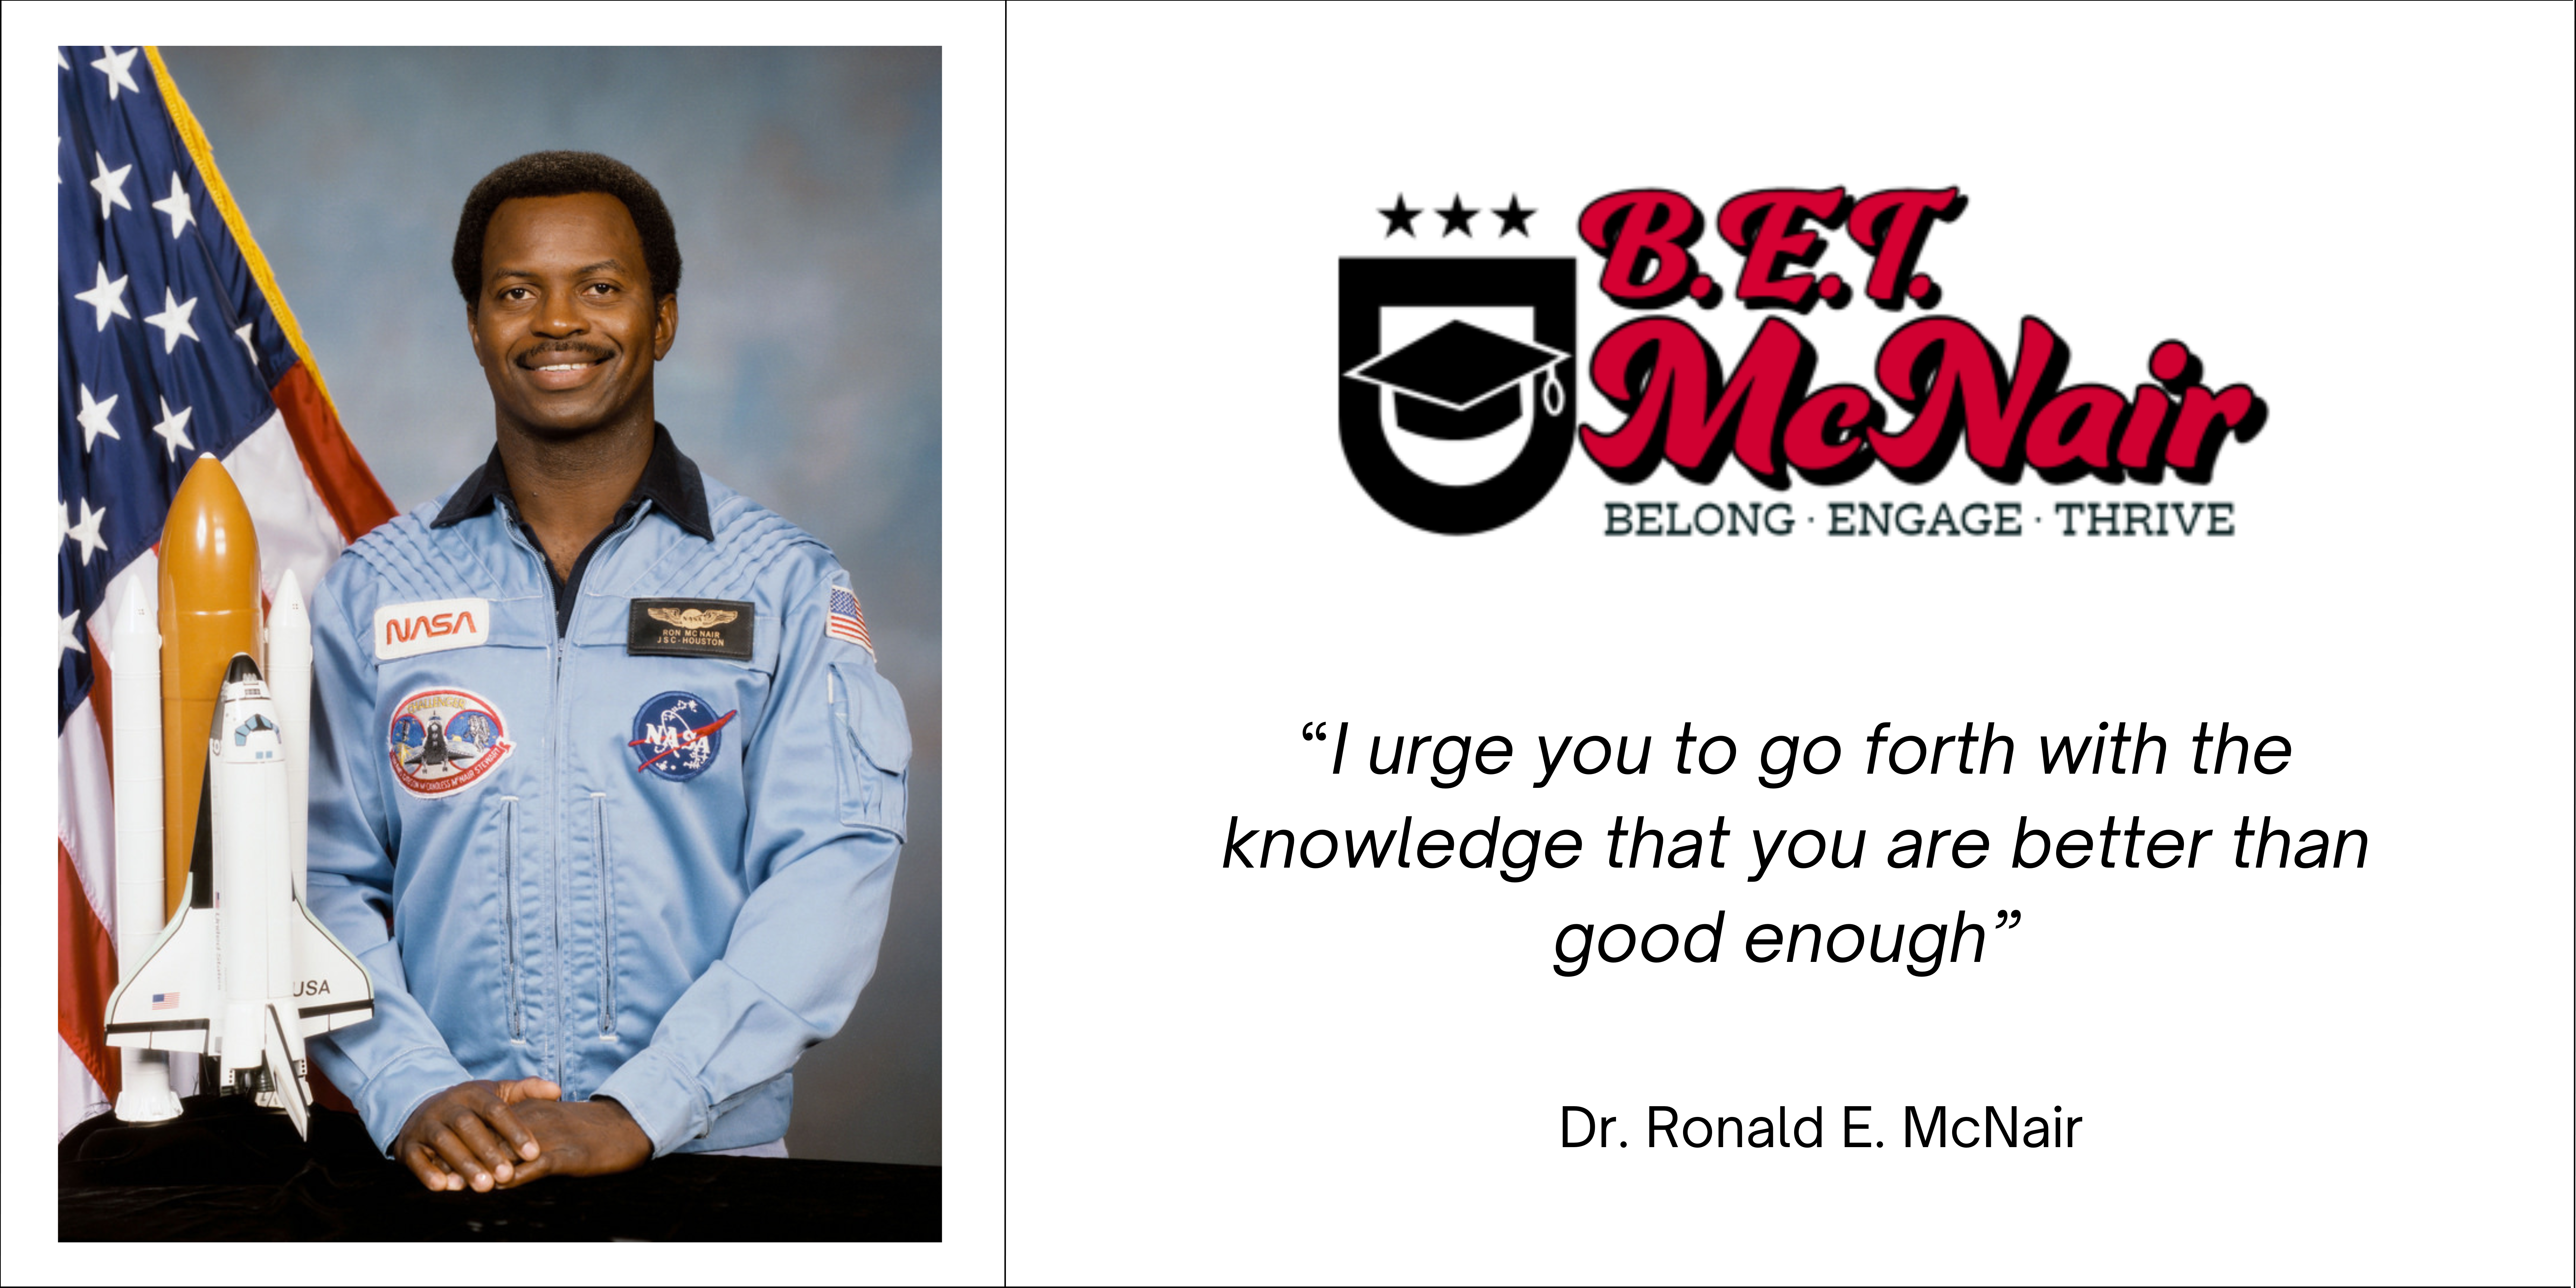 B.E.T McNair. Belong, Engage, Thrive. “I urge you to go forth with the knowledge that you are better than good enough”  Dr. Ronald E. McNair.